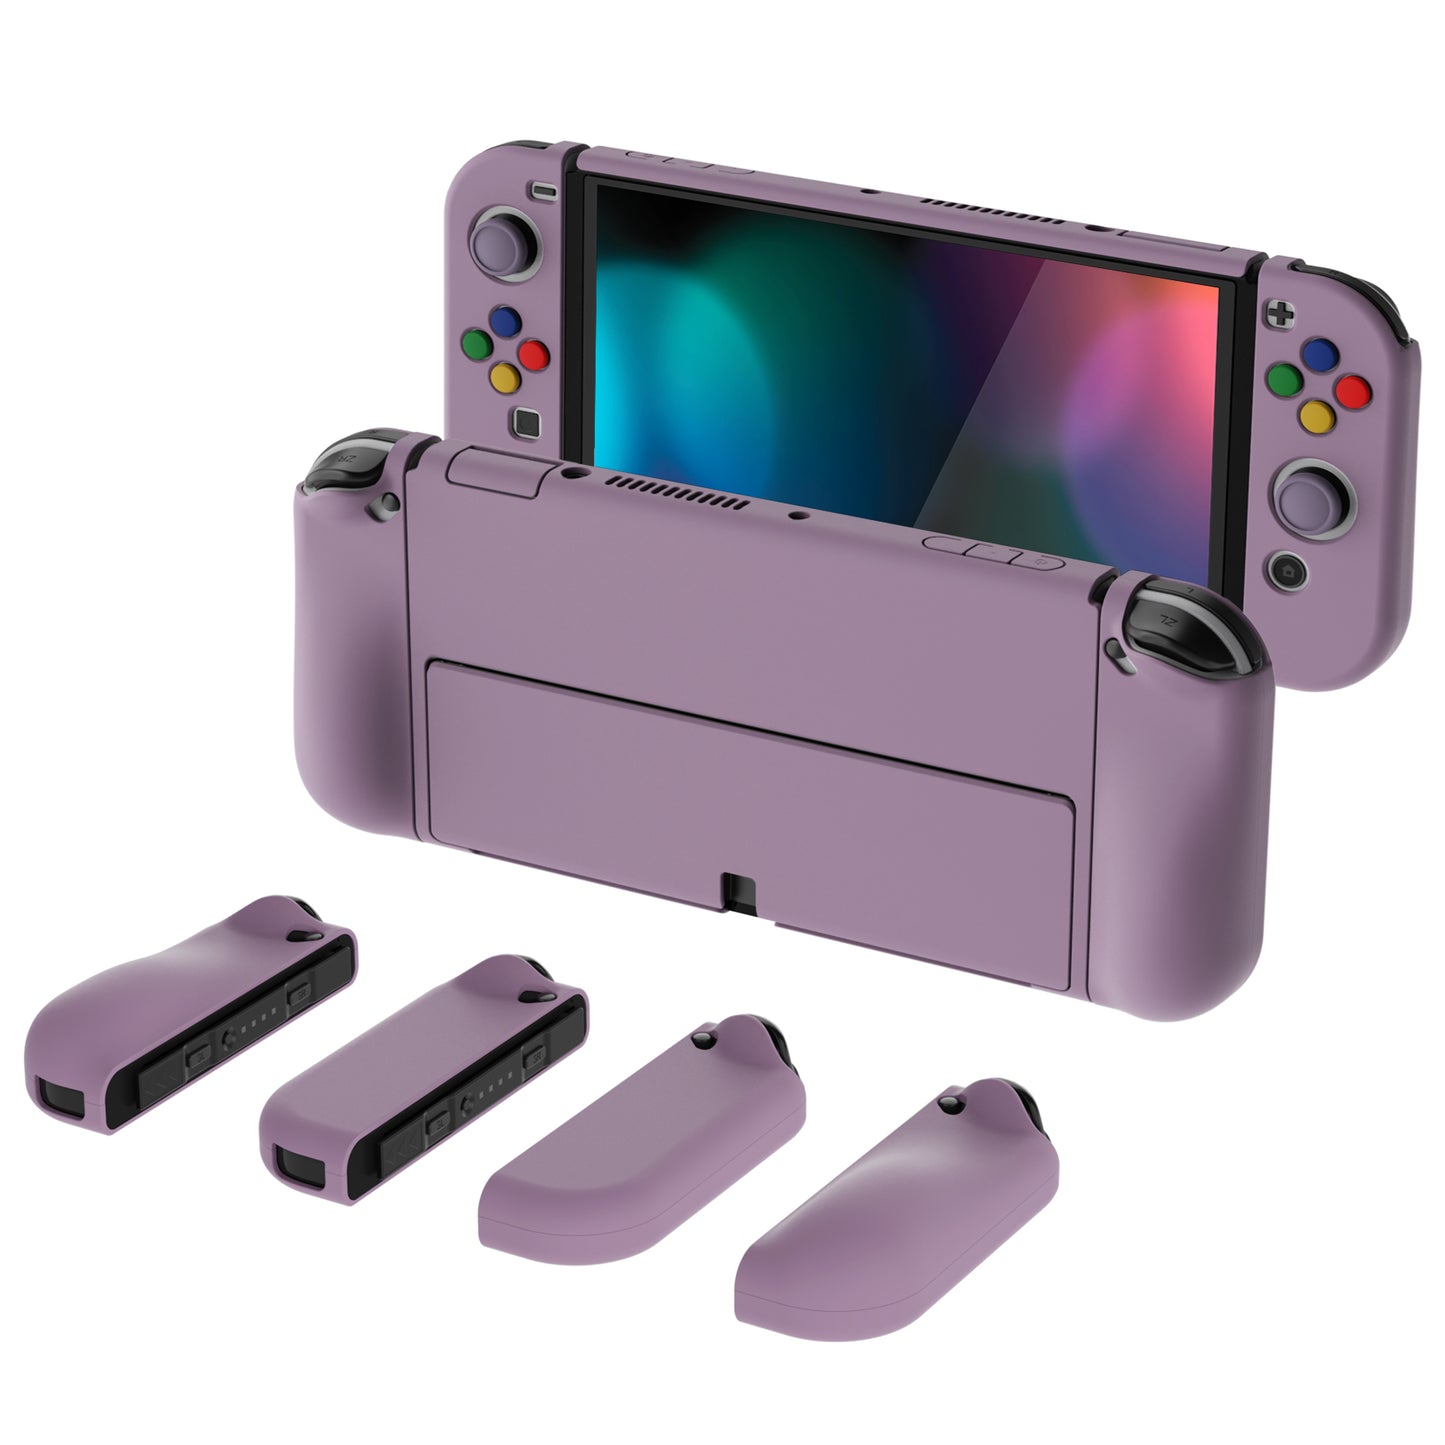 PlayVital AlterGrips Protective Slim Case for Nintendo Switch OLED, Ergonomic Grip Cover for Joycon, Dockable Hard Shell for Switch OLED with Thumb Grip Caps & Button Caps - Dark Grayish Violet - JSOYP3006 playvital